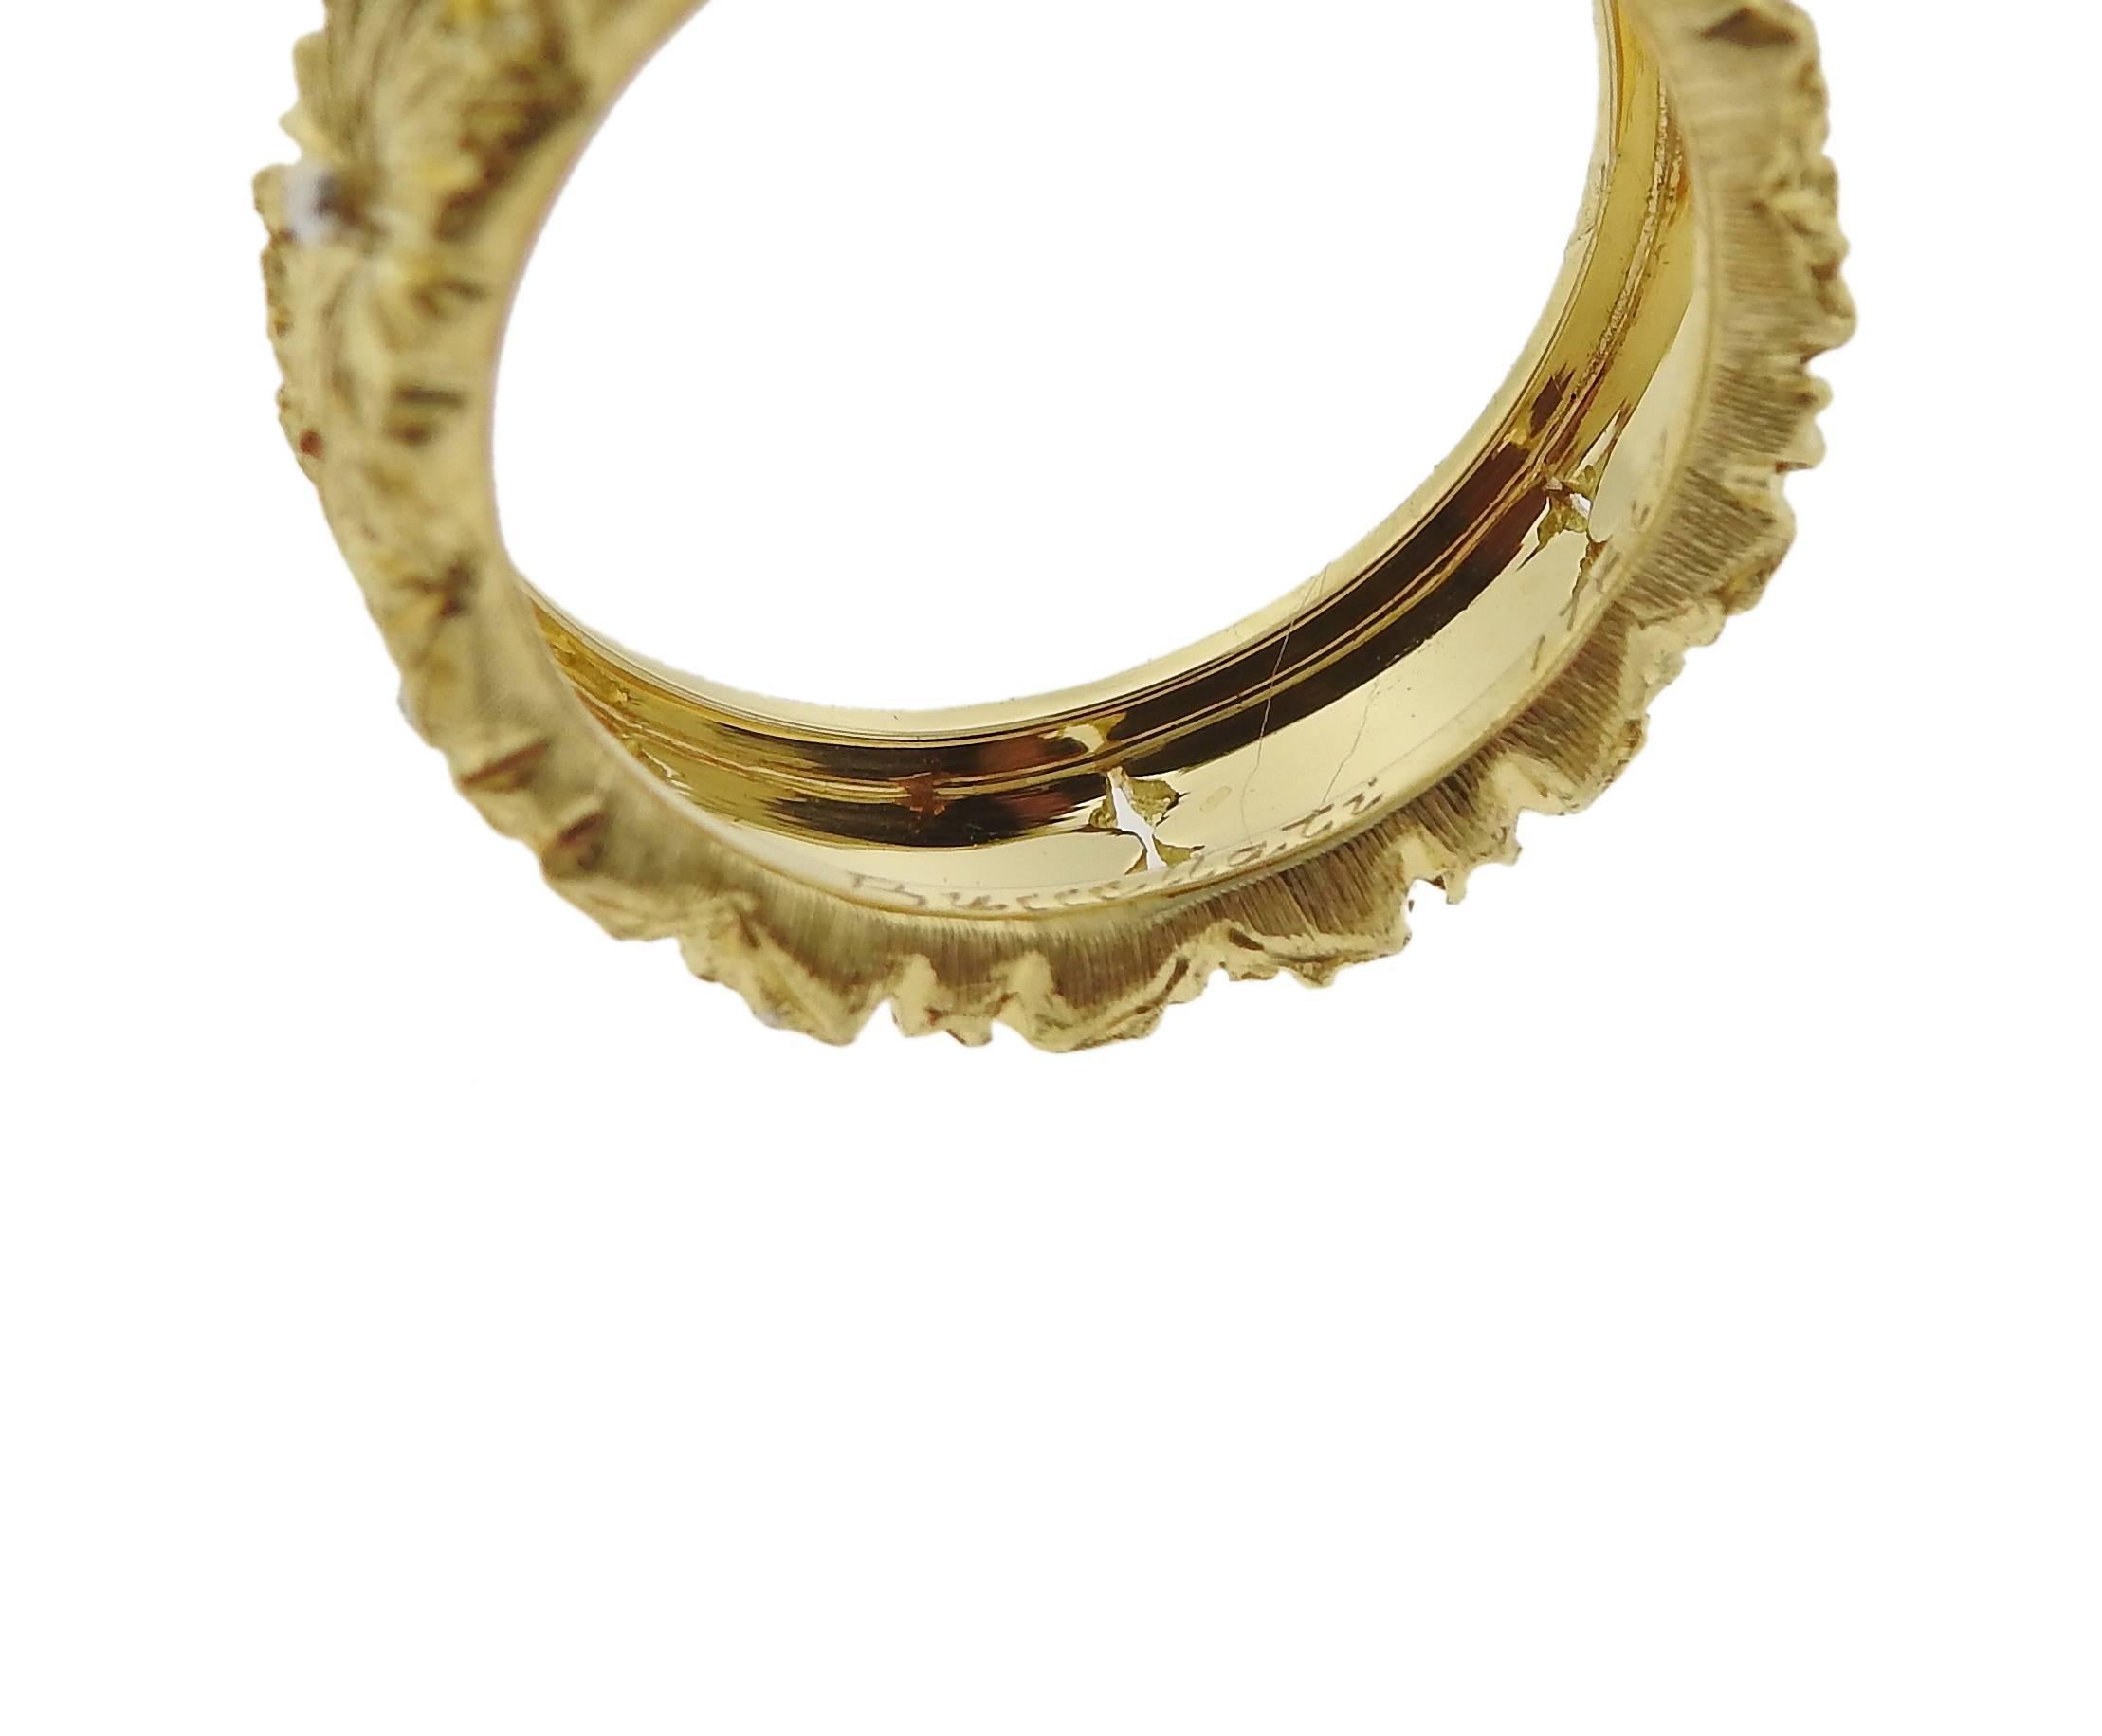 18k yellow gold Cassettoni flower band ring, crafted by Buccellati. Ring size - 6, ring is 7mm wide, weighs 6.8 grams. Marked: Buccellati, Italy, 18k 
Retail $5610